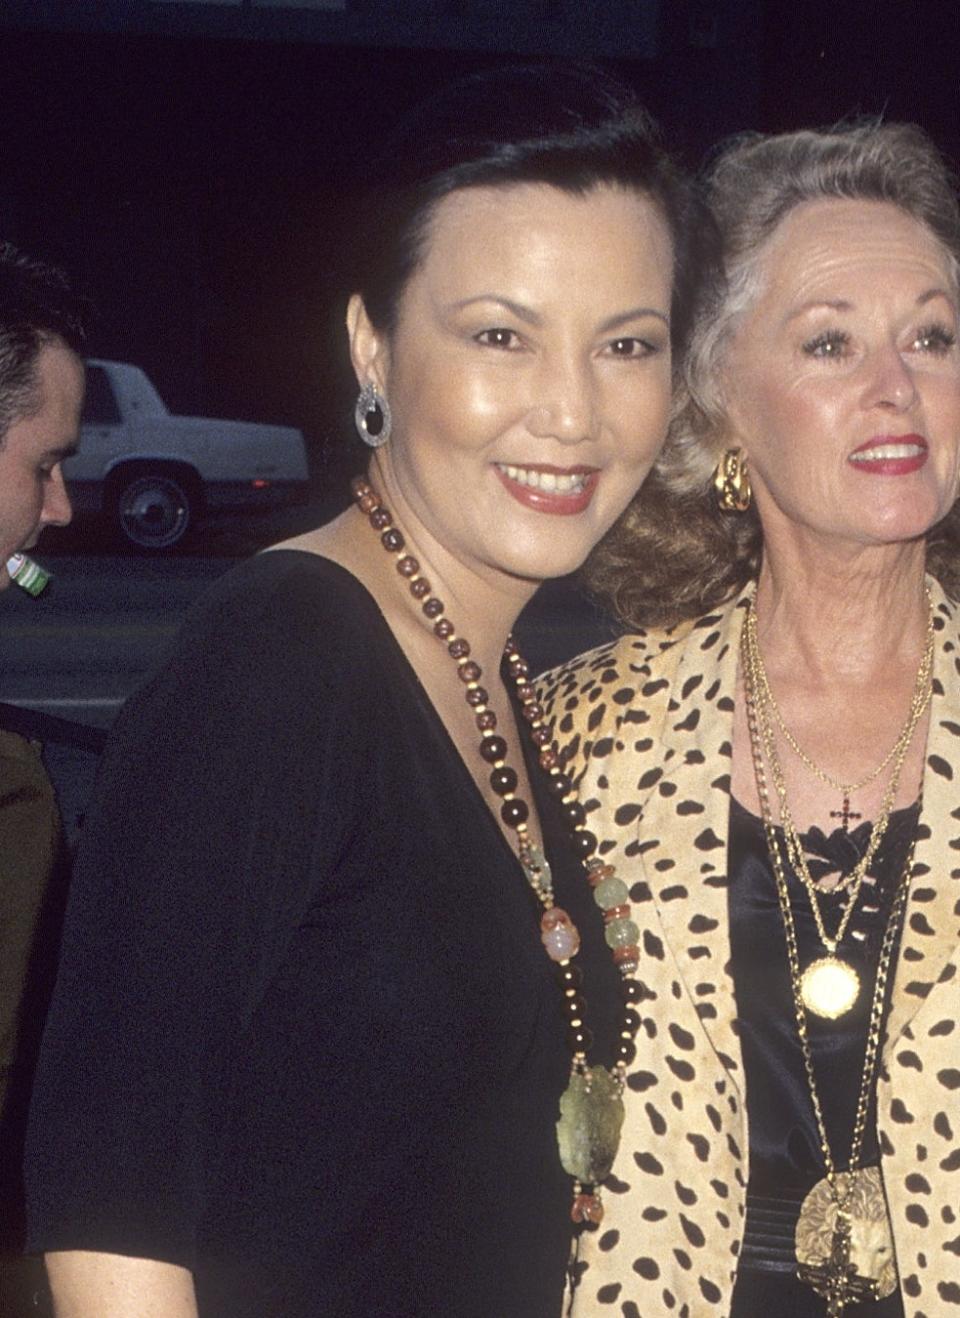 Actress Kieu Chinh and actress Tippi Hedren at the screening of "The Joy Luck Club" on August 28, 1993 at the Crest Theater in Westwood, California